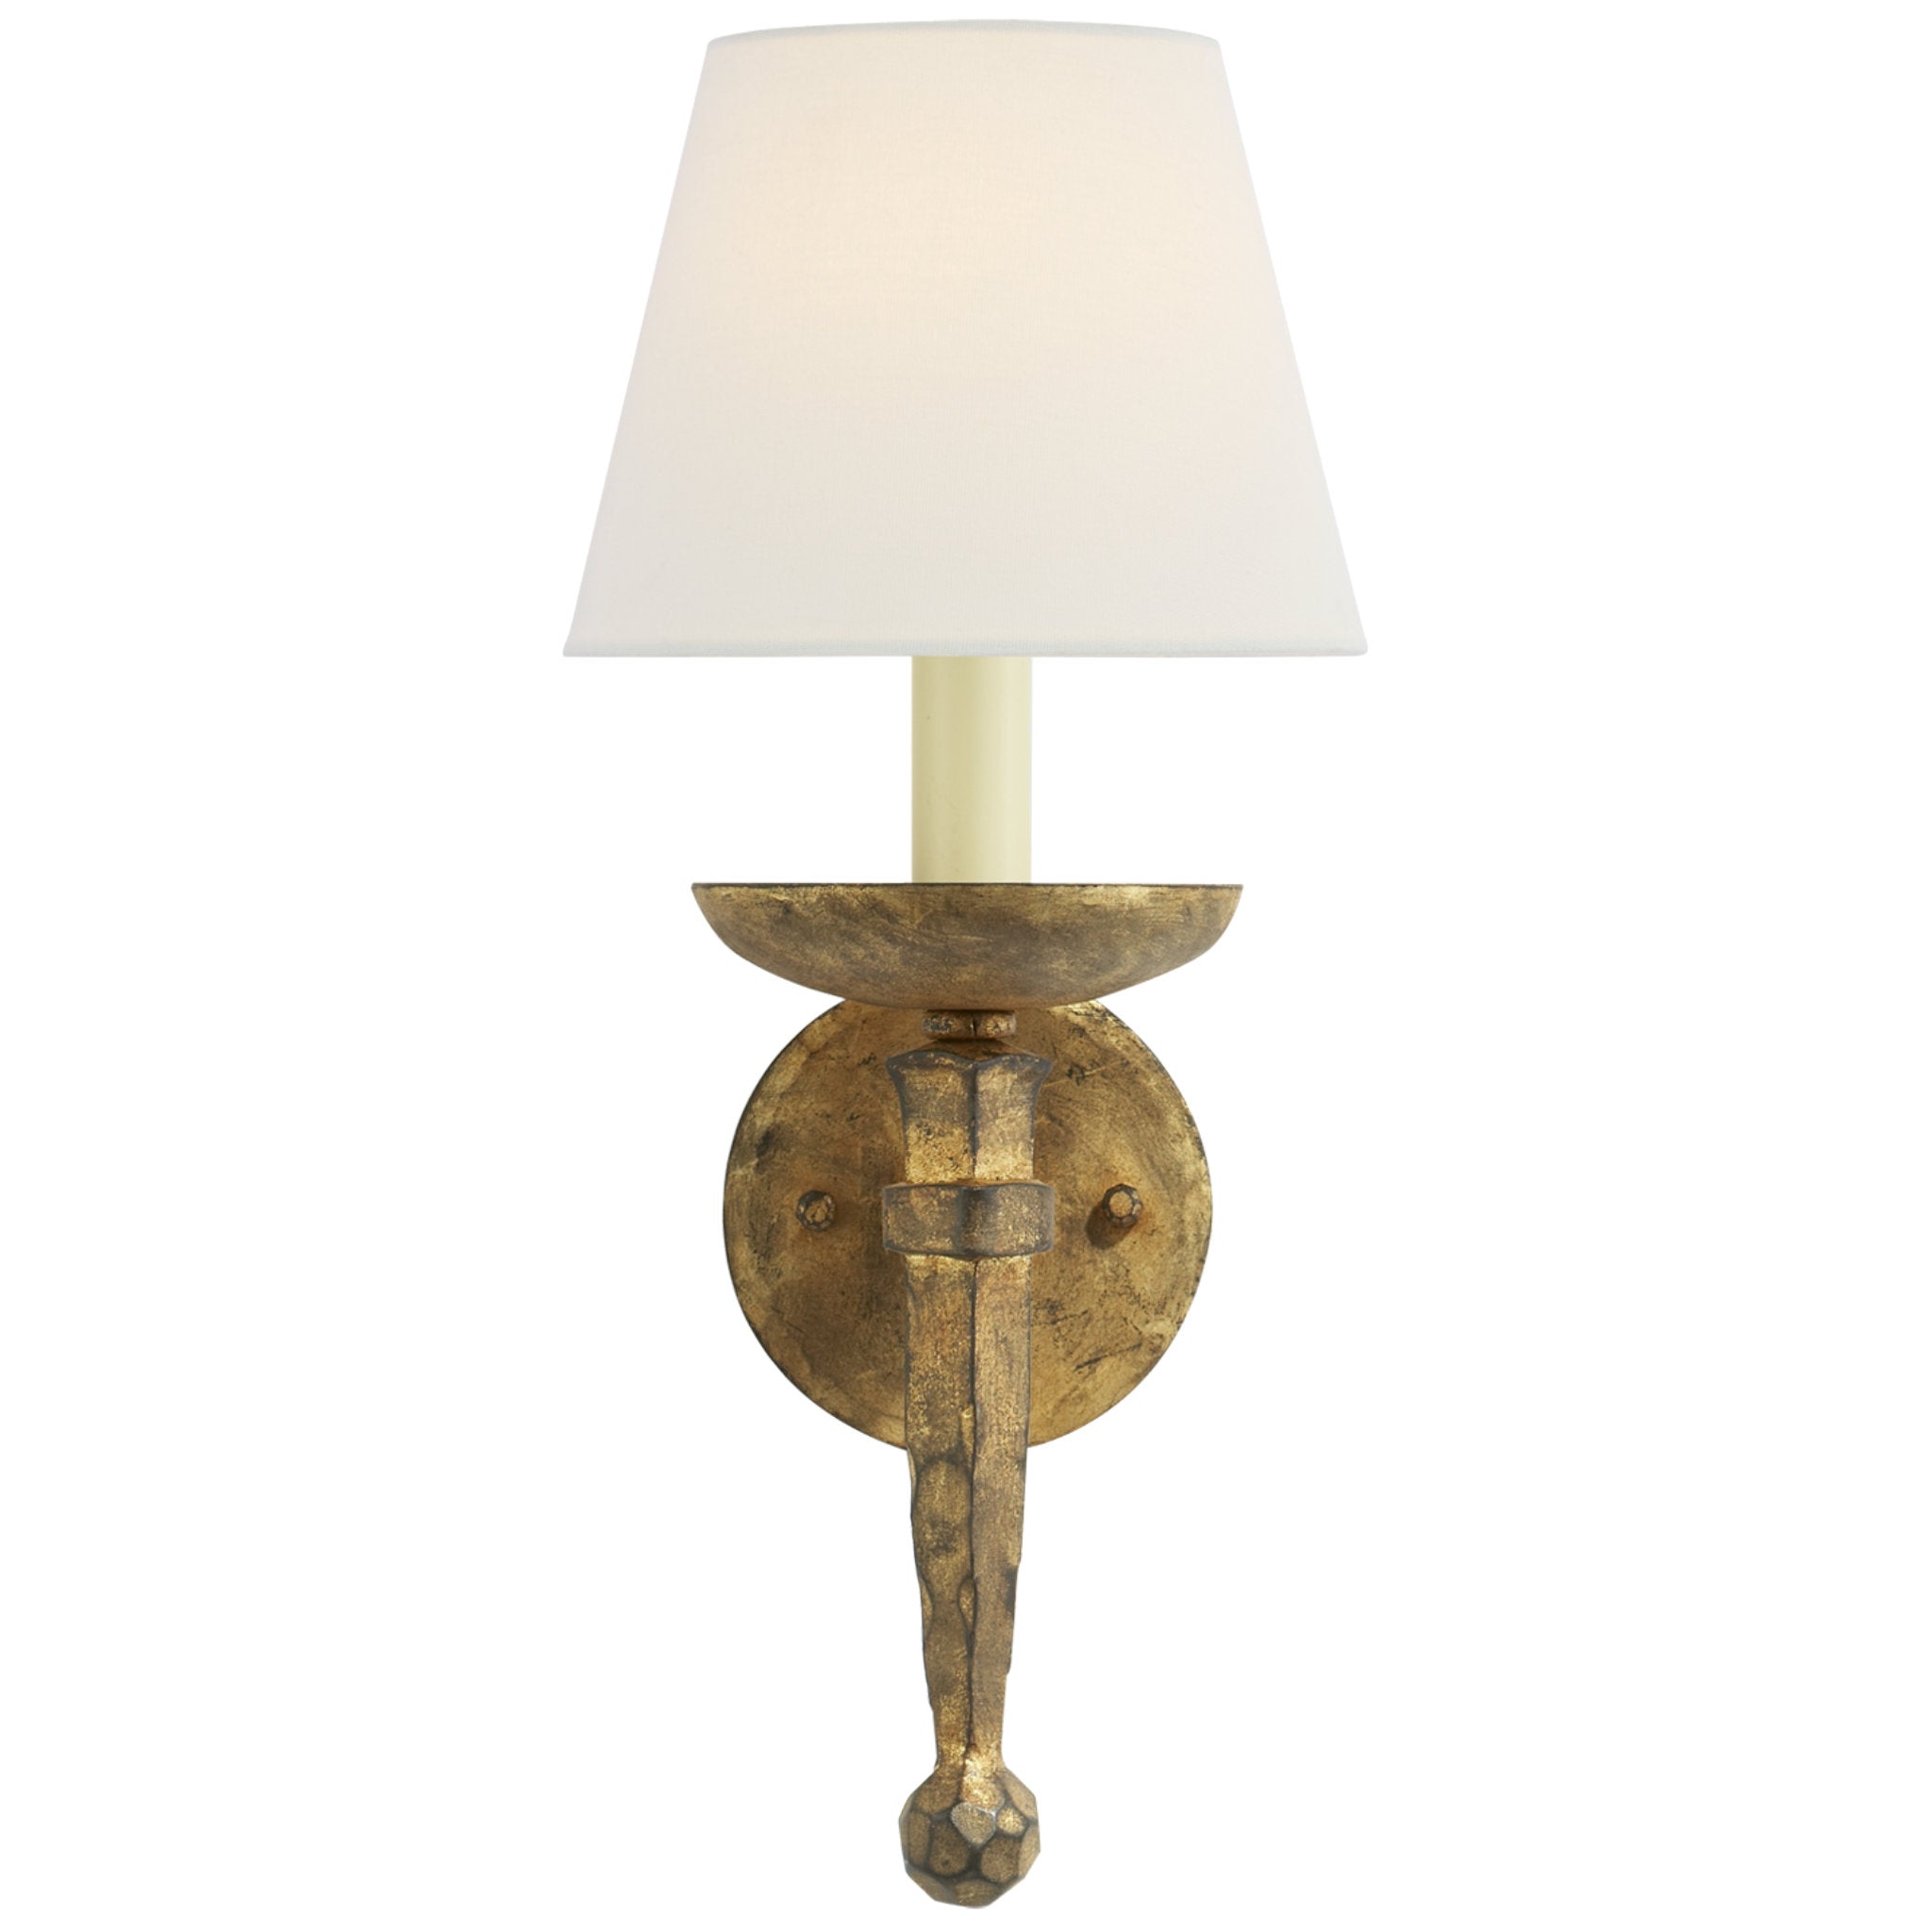 Chapman & Myers Iron Torch Sconce in Gilded Iron with Linen Shade